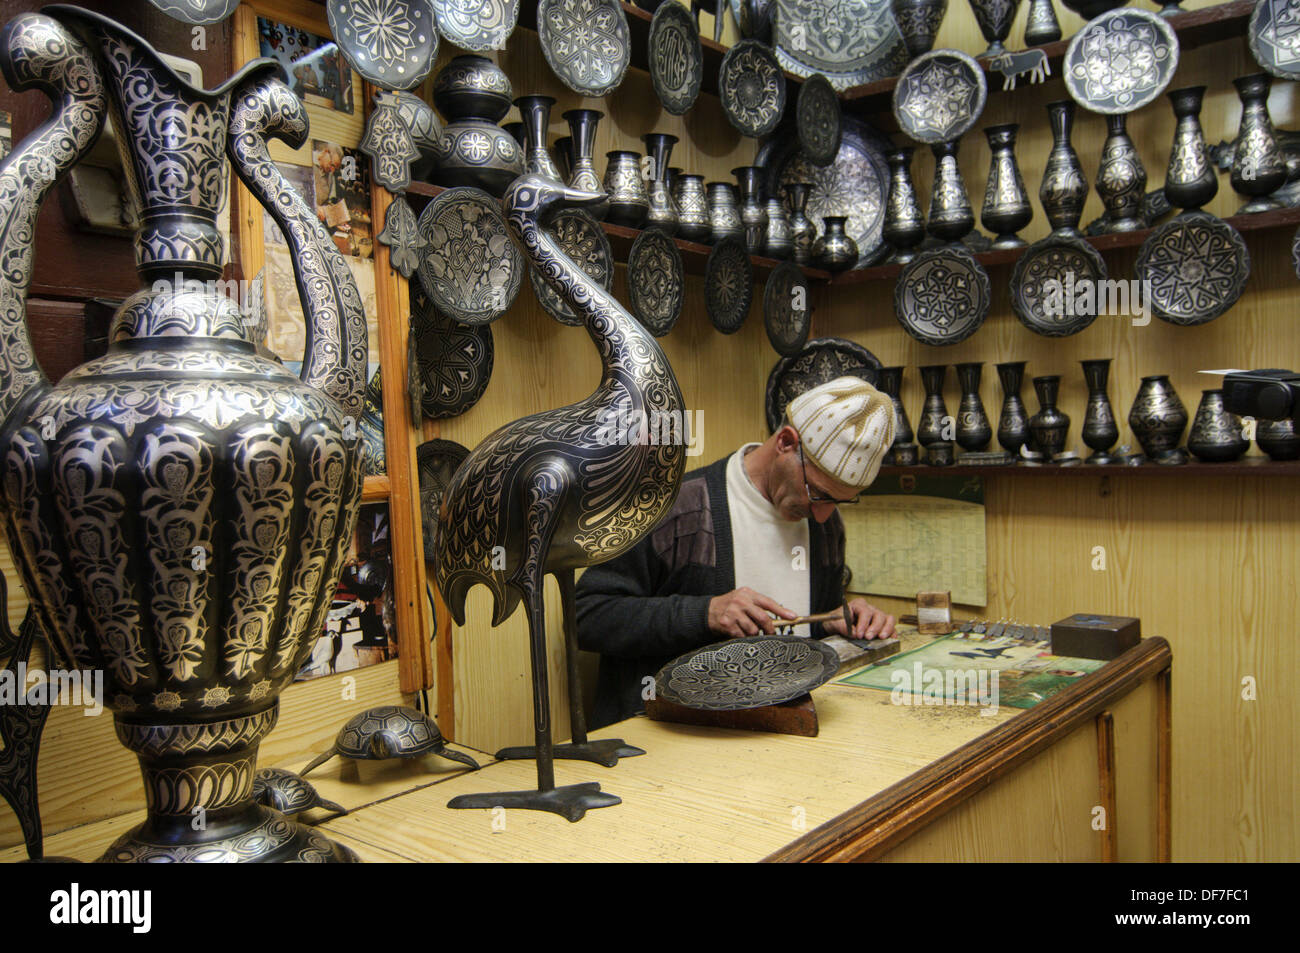 Working in silver covered crafts handwork at a shop in Fez, Morocco Stock Photo